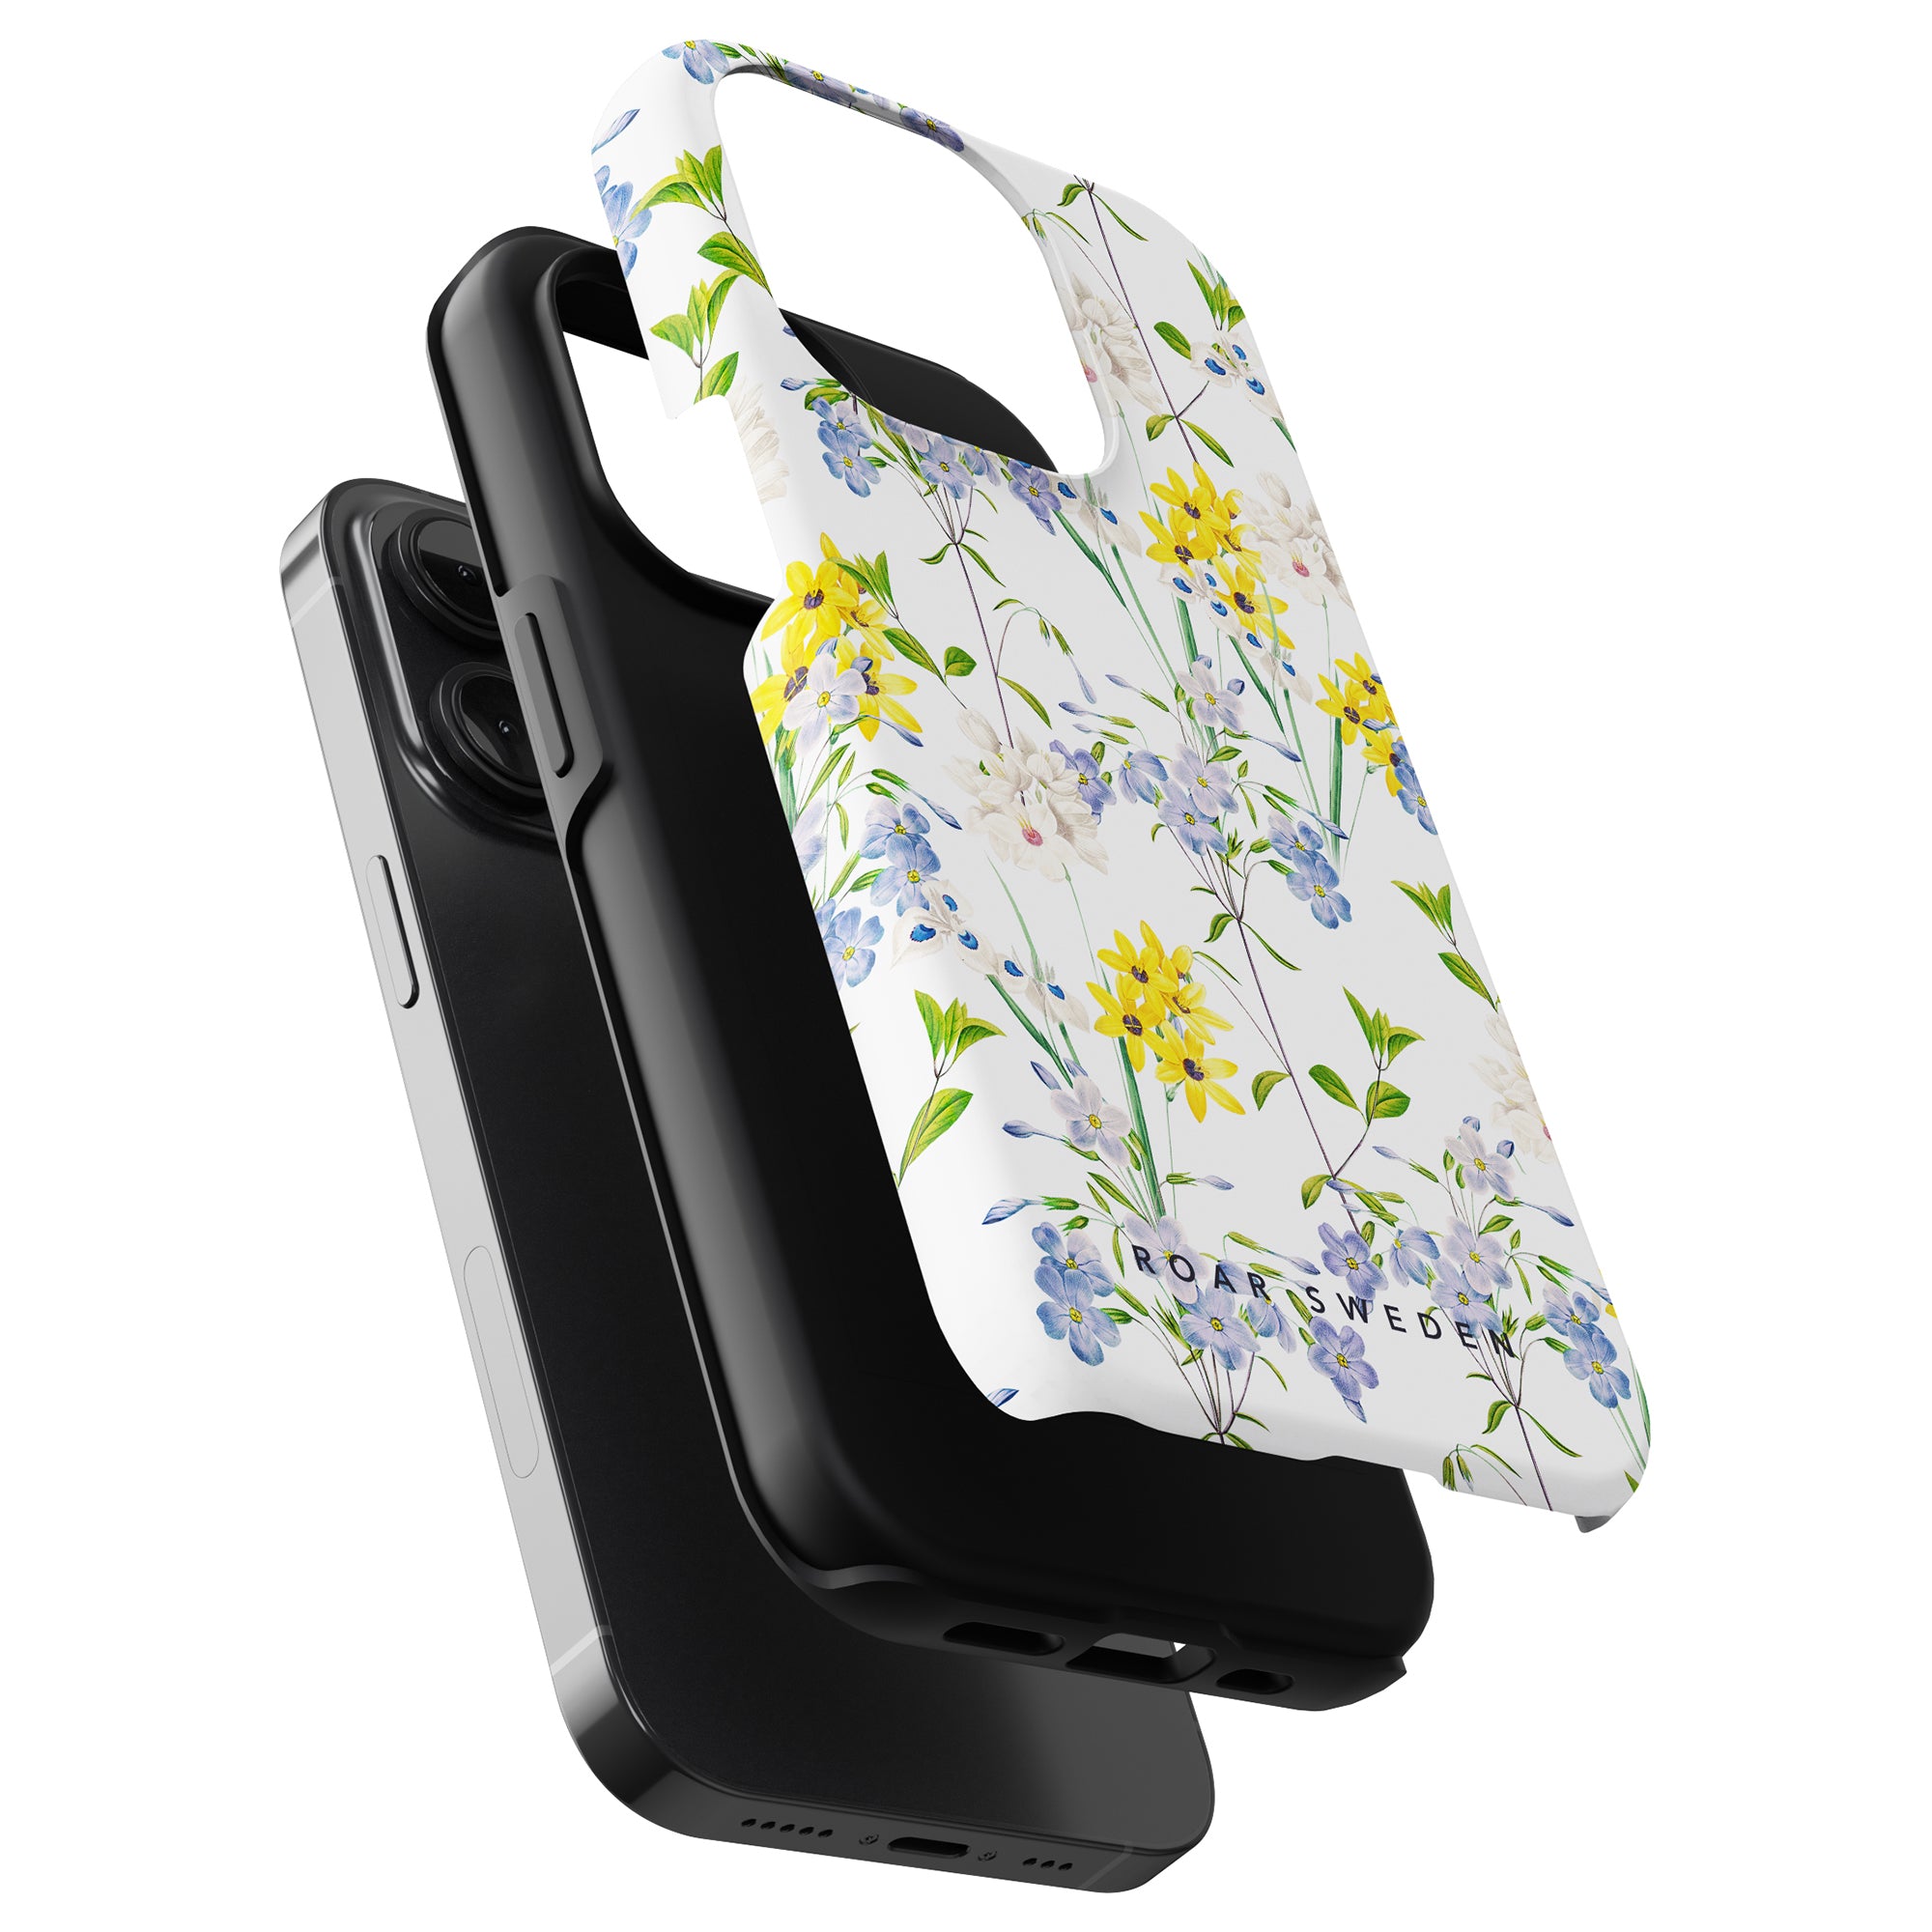 A black smartphone with the Summer Flowers - Tough Case and noise-cancellation wireless earbuds accessory.